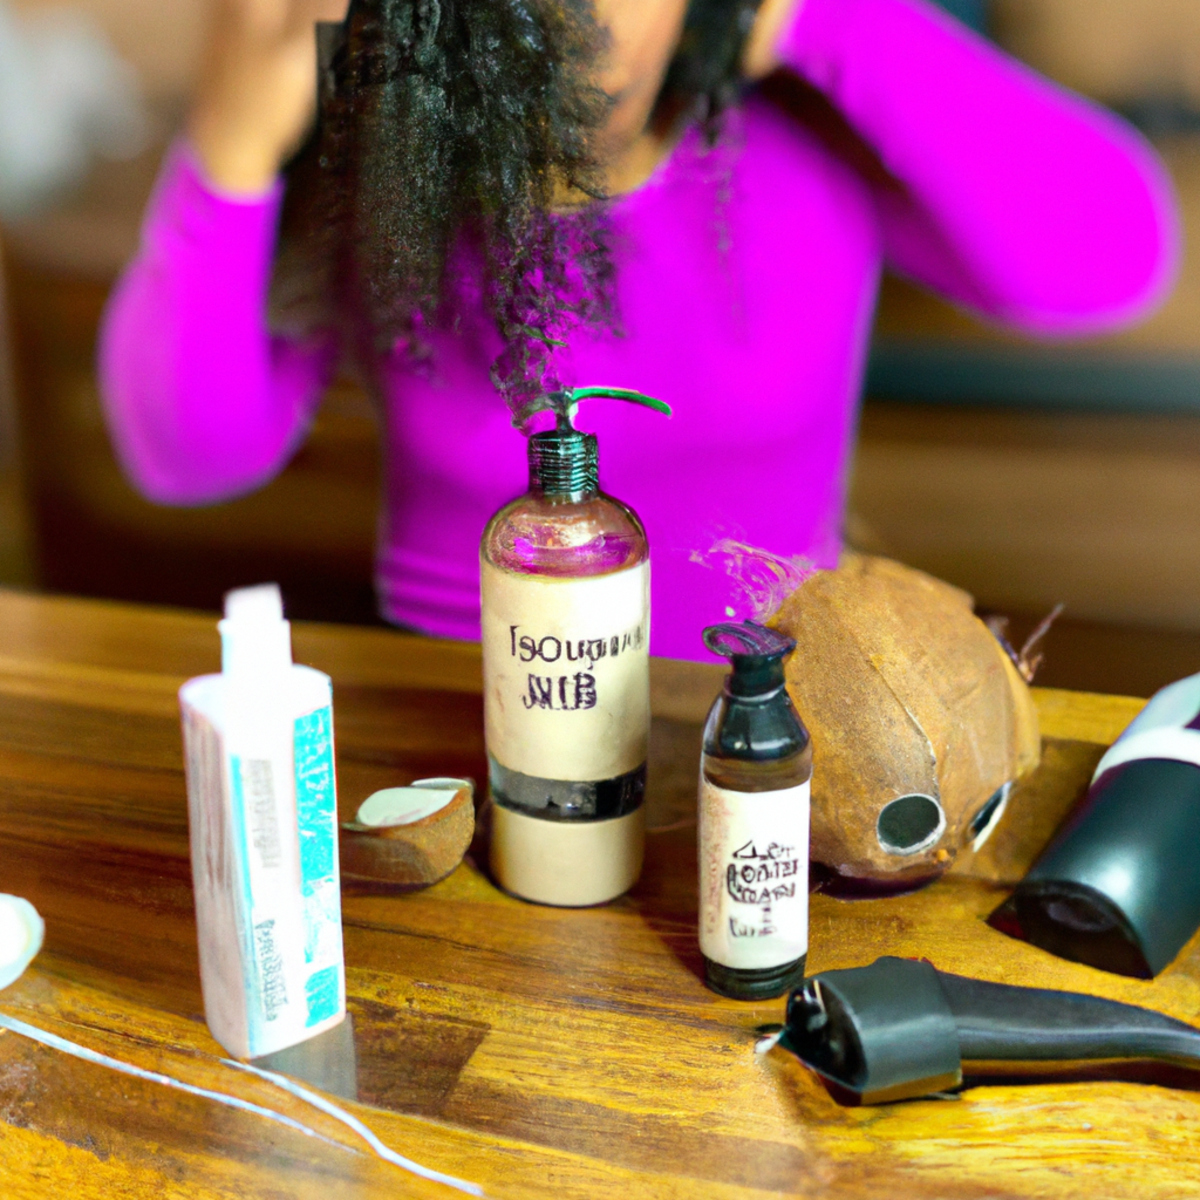 Two curly-haired models use hair products and tools on a wooden table, embracing their natural curls in natural light.